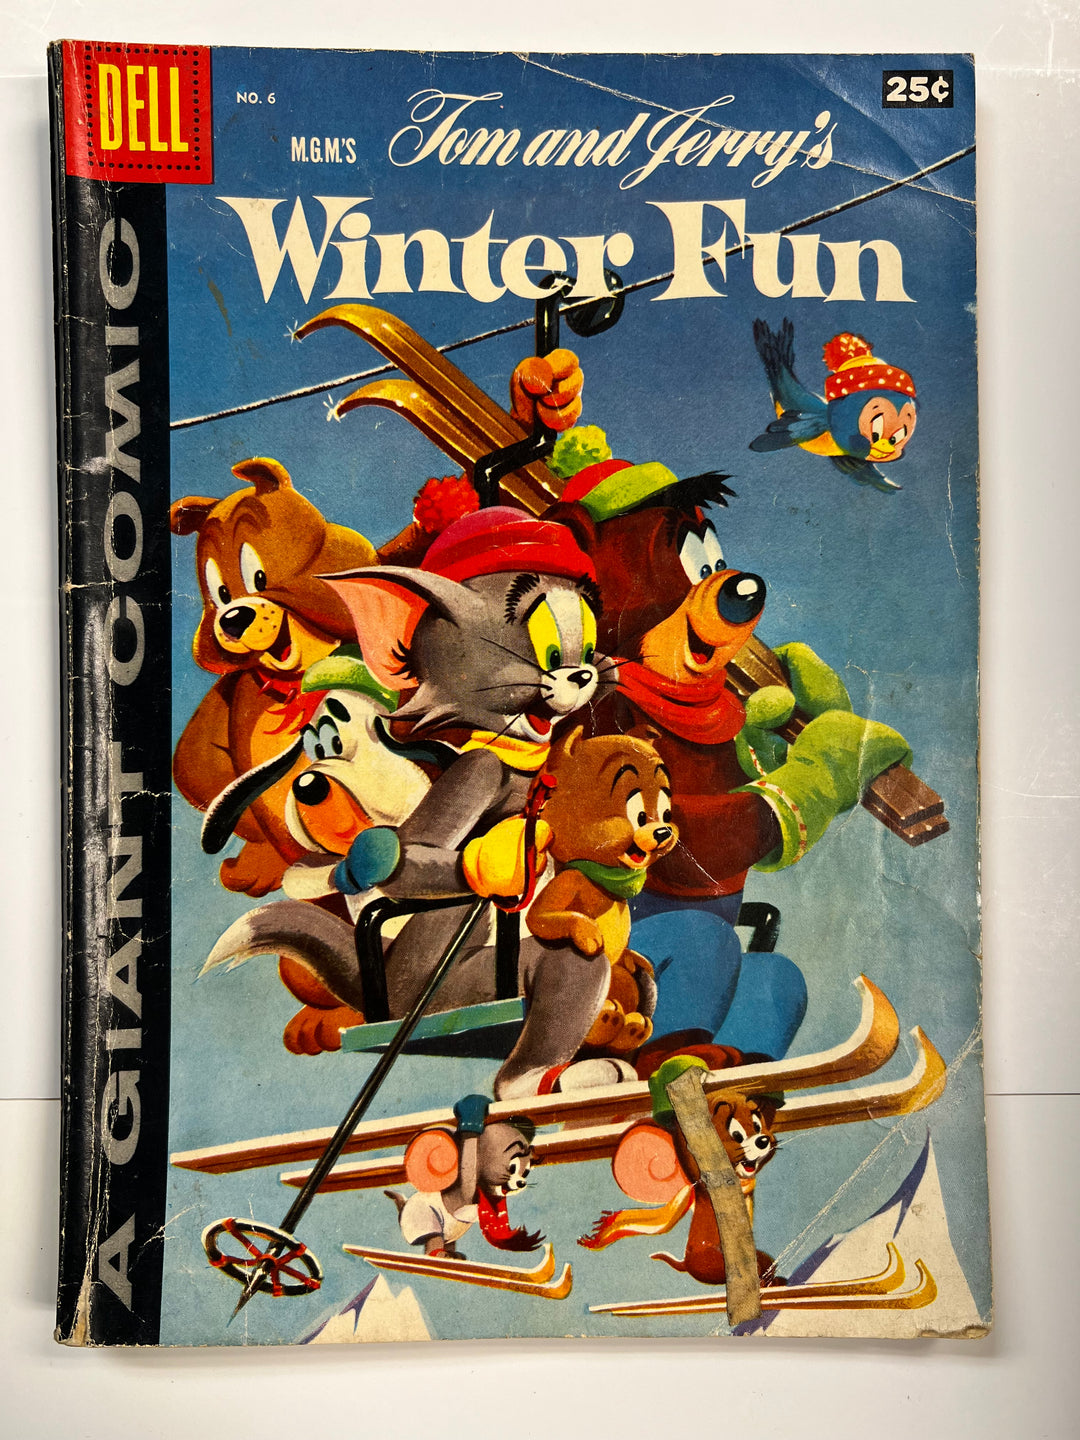 Tom and Jerry's Winter Fun #6 Dell 1957 G/VG